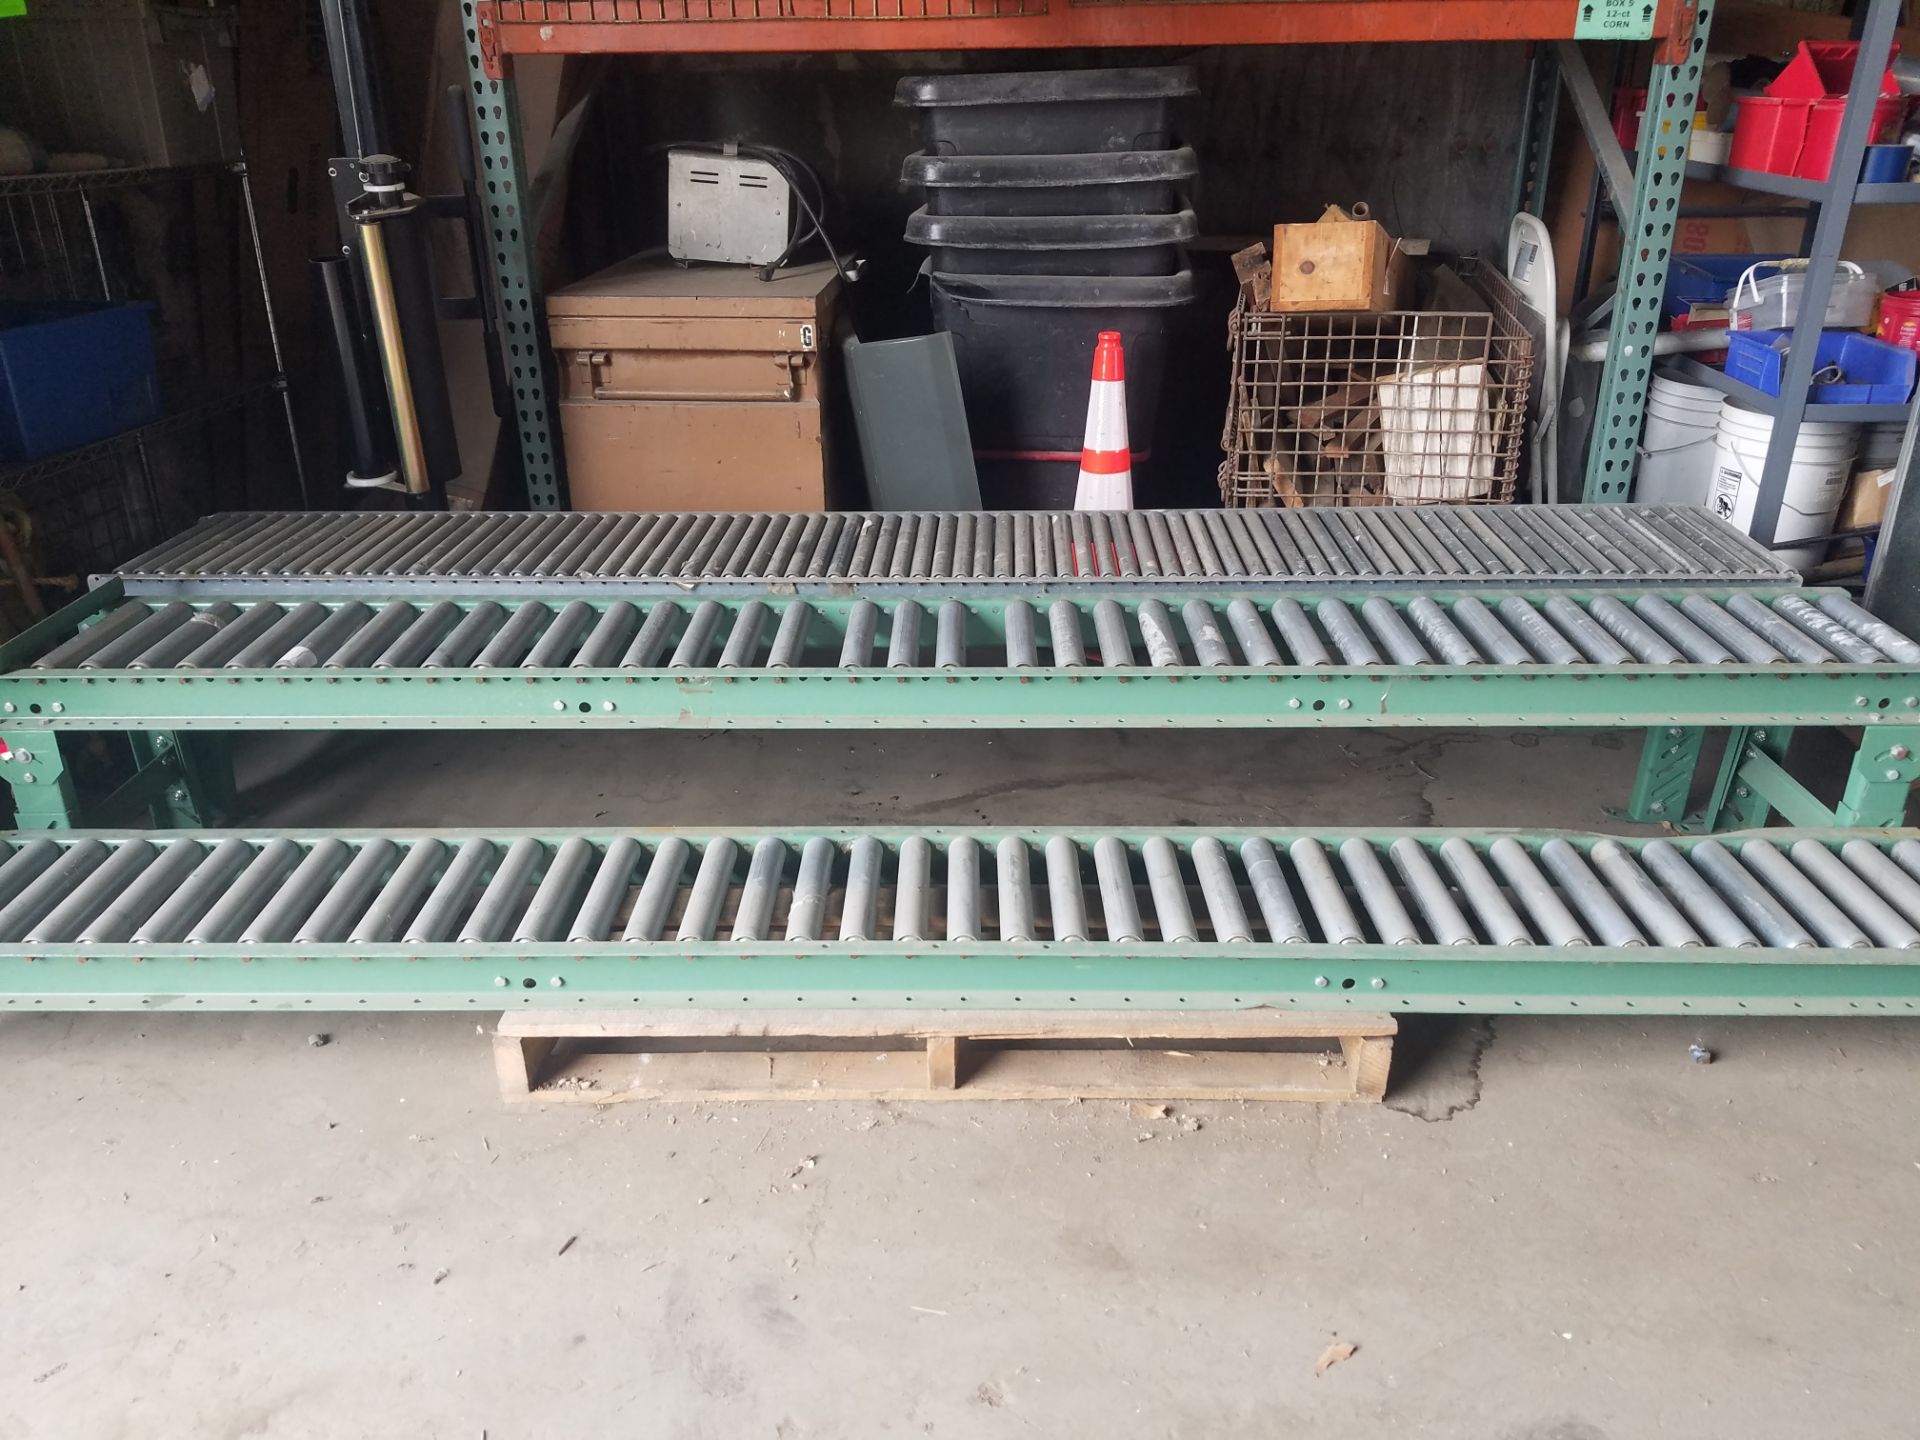 (2) Aprox. 12" W x 120" Long Gravity Conveyors and (1) 16" Wide x 120" Long Gravity Conveyor (